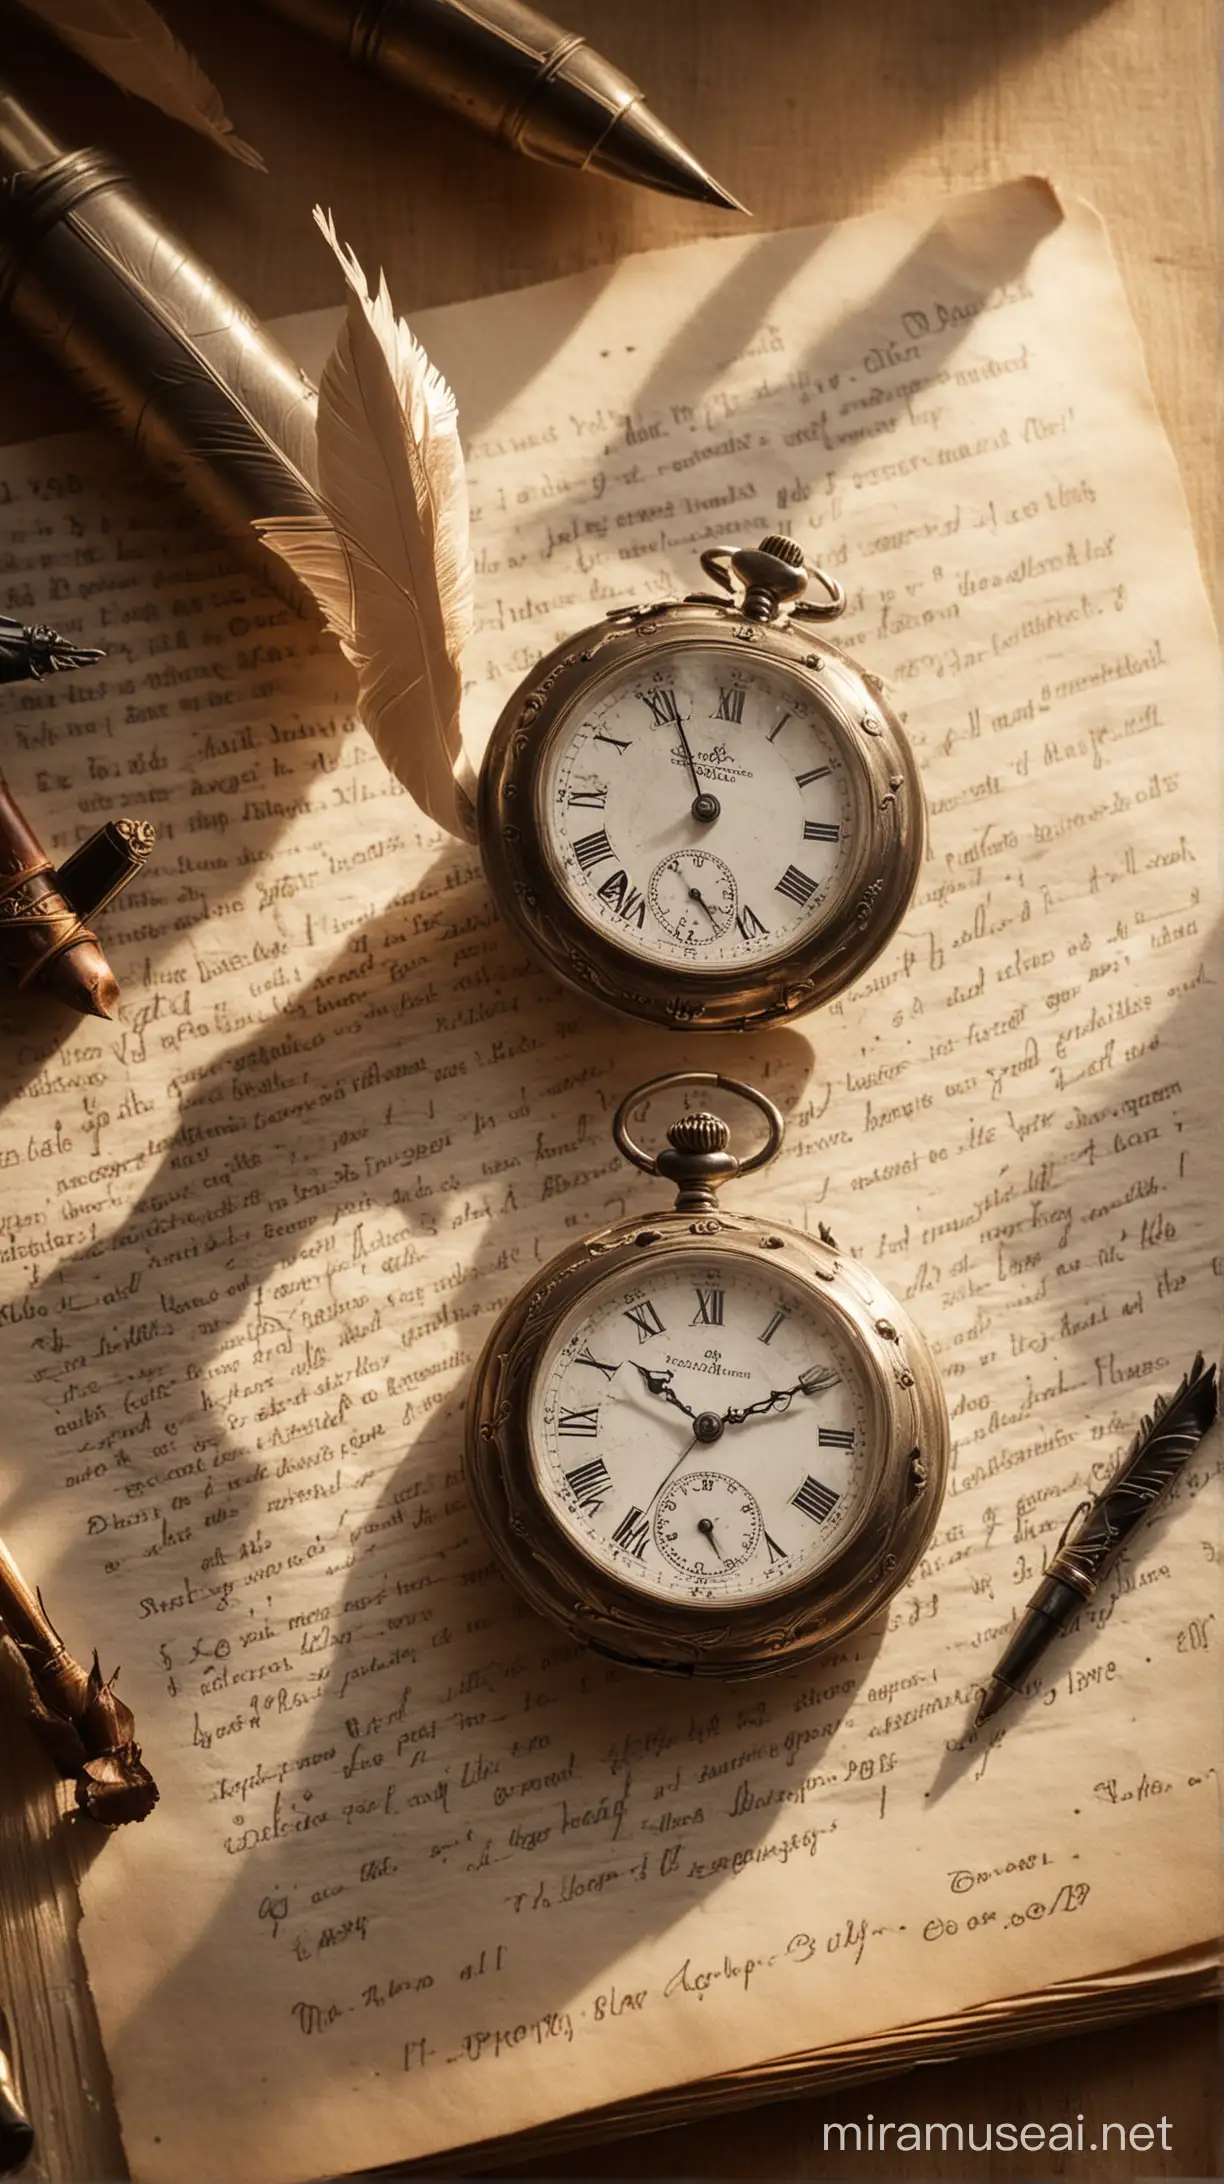 An antique pocket watch rests against a backdrop of aged parchment, surrounded by scattered quill pens and open books. Rays of light filter through a nearby window, casting soft shadows across the scene. The watch's hands point to precise moments, illustrating the concept of time mastery and the importance of organization and focus.